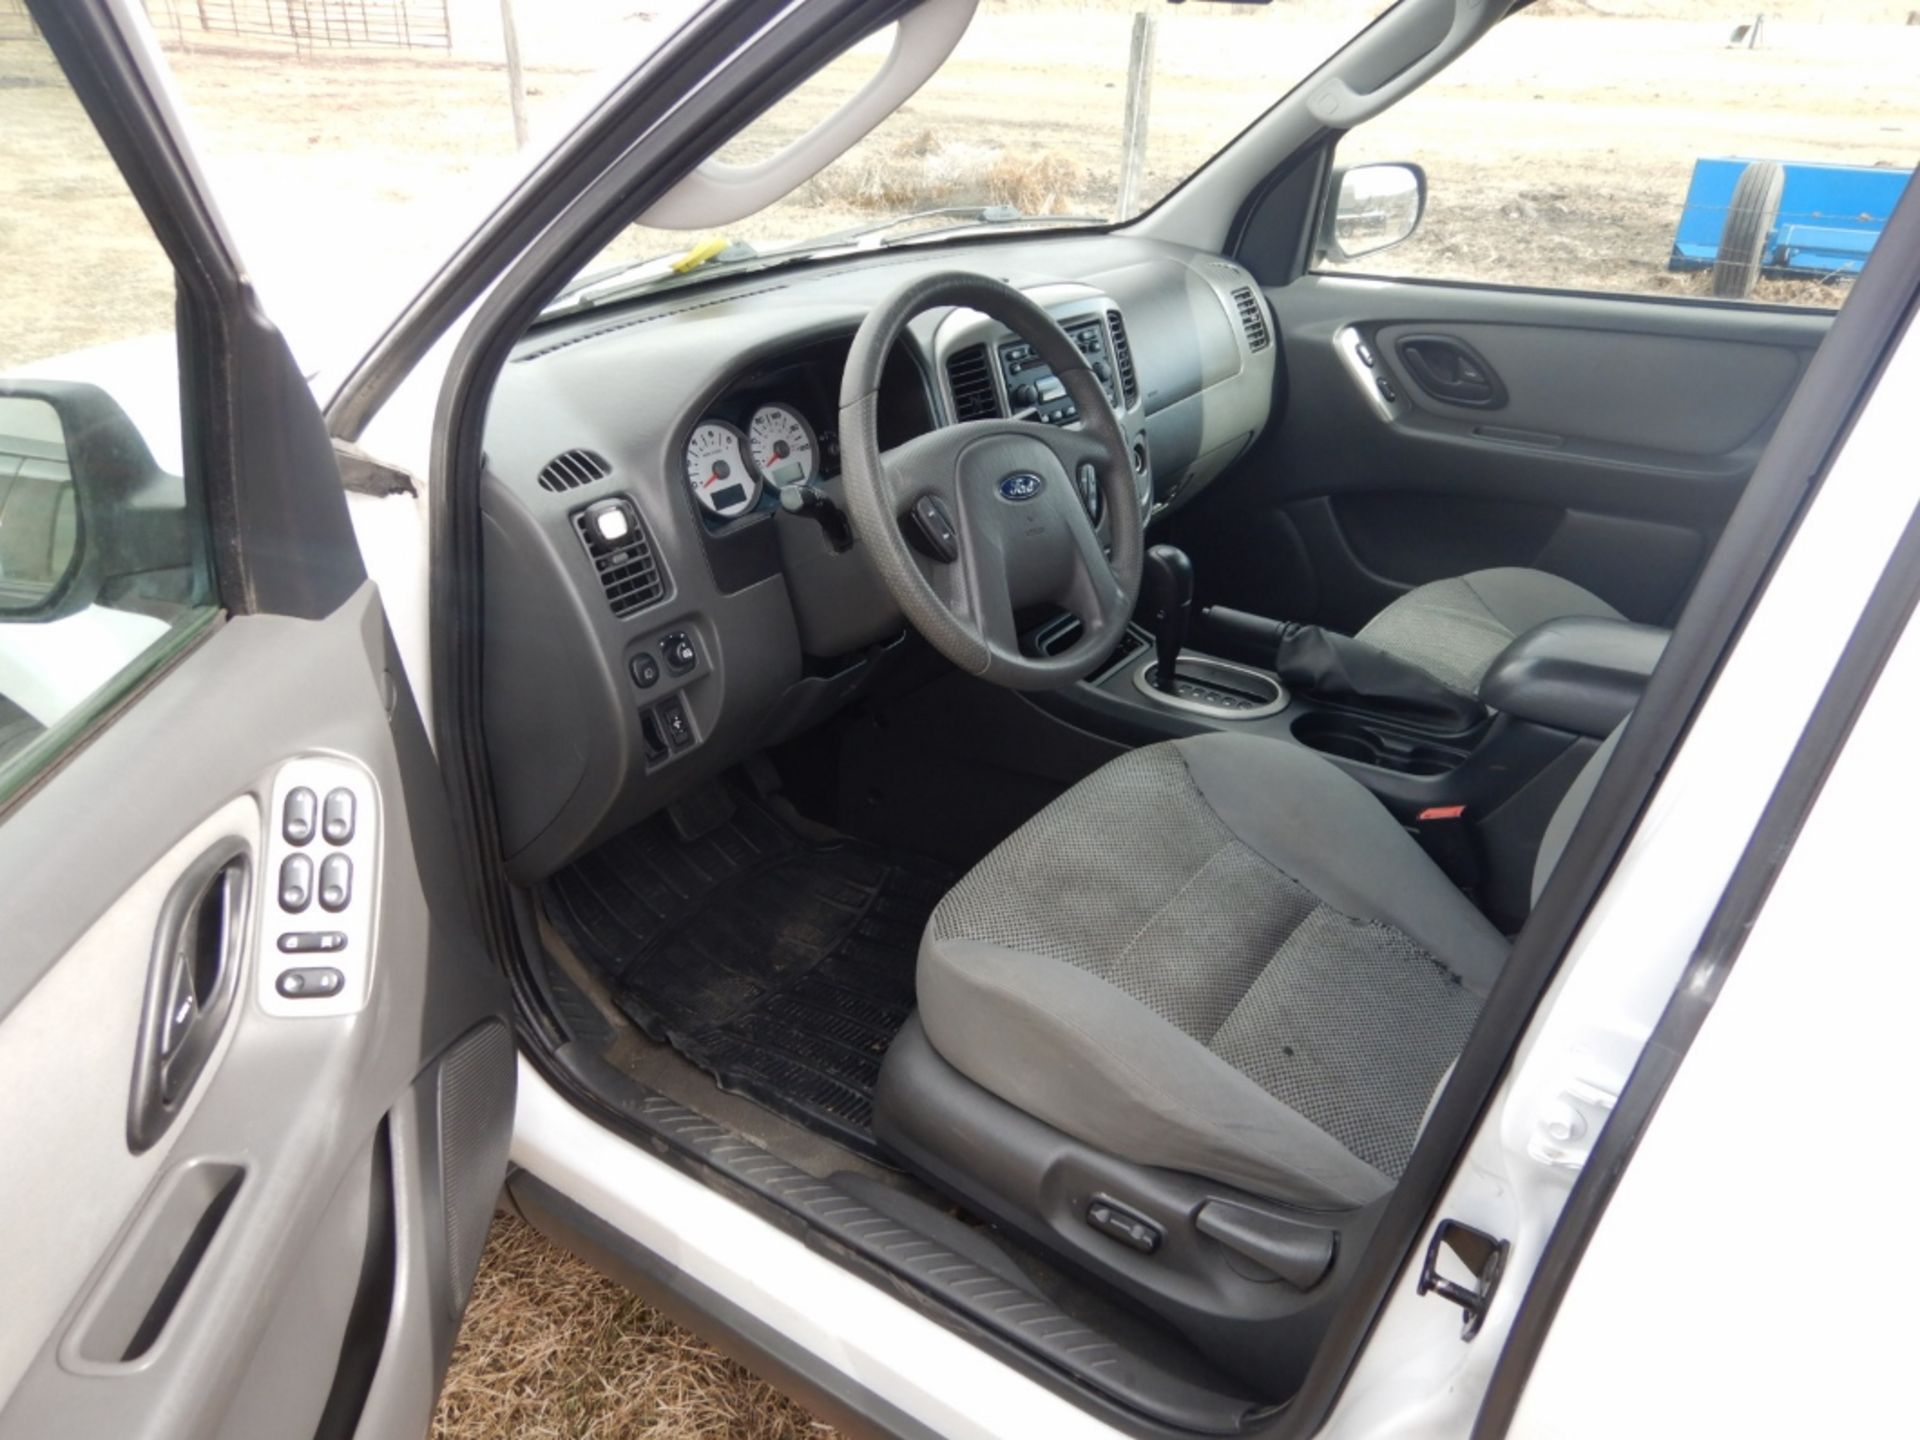 2005 FORD ESCAPE XLT, AWD, 3.0L V6, AUTOMATIC, POWER WINDOW, POWER DOOR LOCKS, 269,904 KM'S SHOWING, - Image 8 of 10